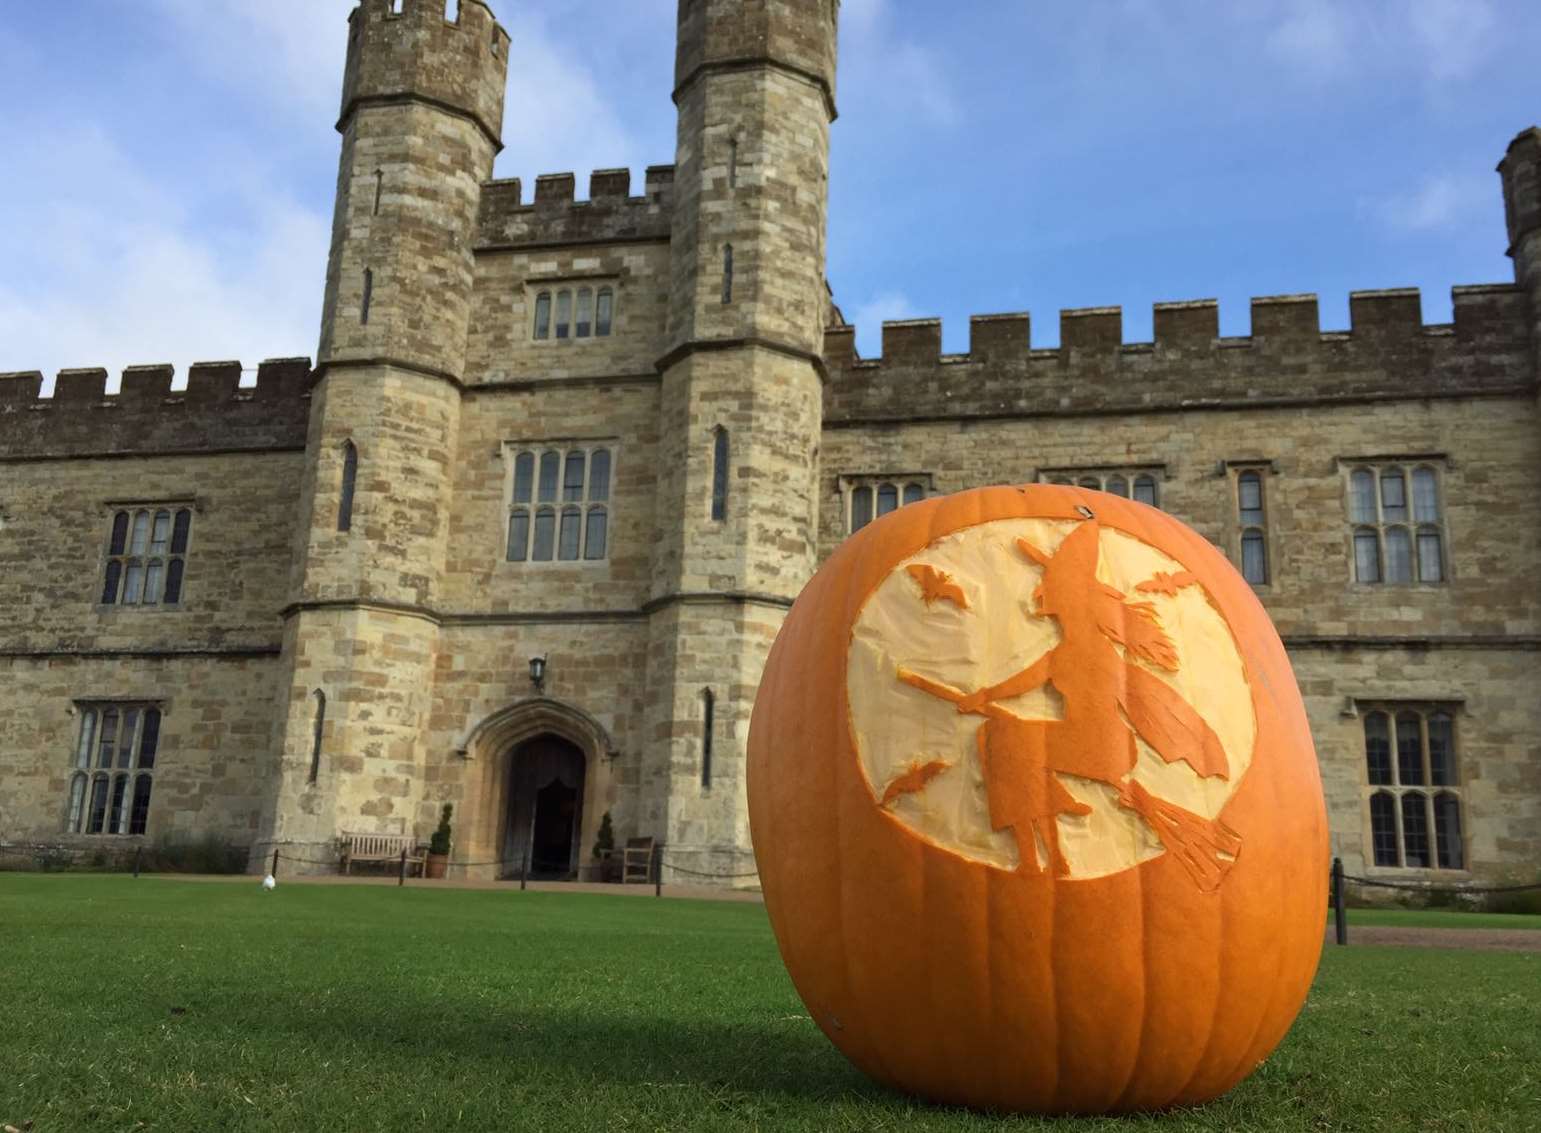 Another Leeds Castle pumpkin... witch do you prefer?